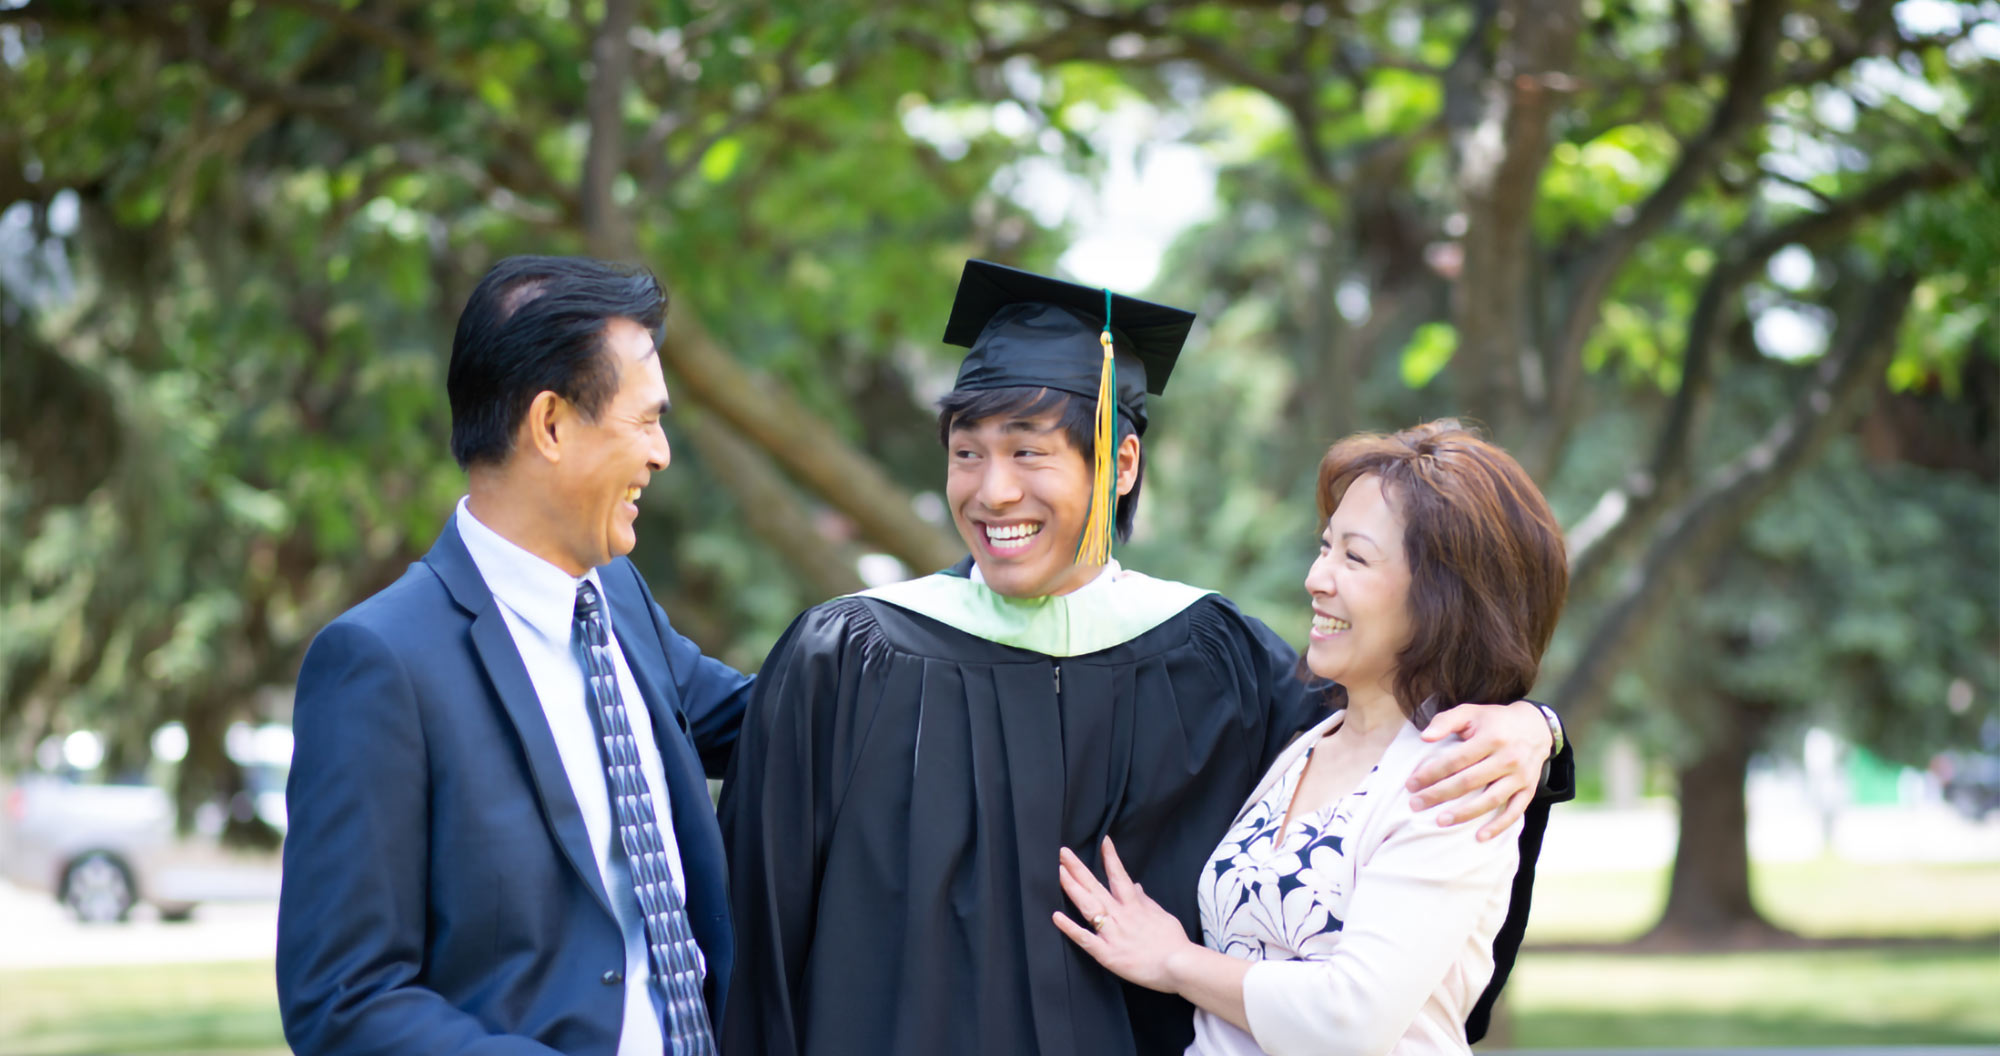 Parents celebrating with their graduating son